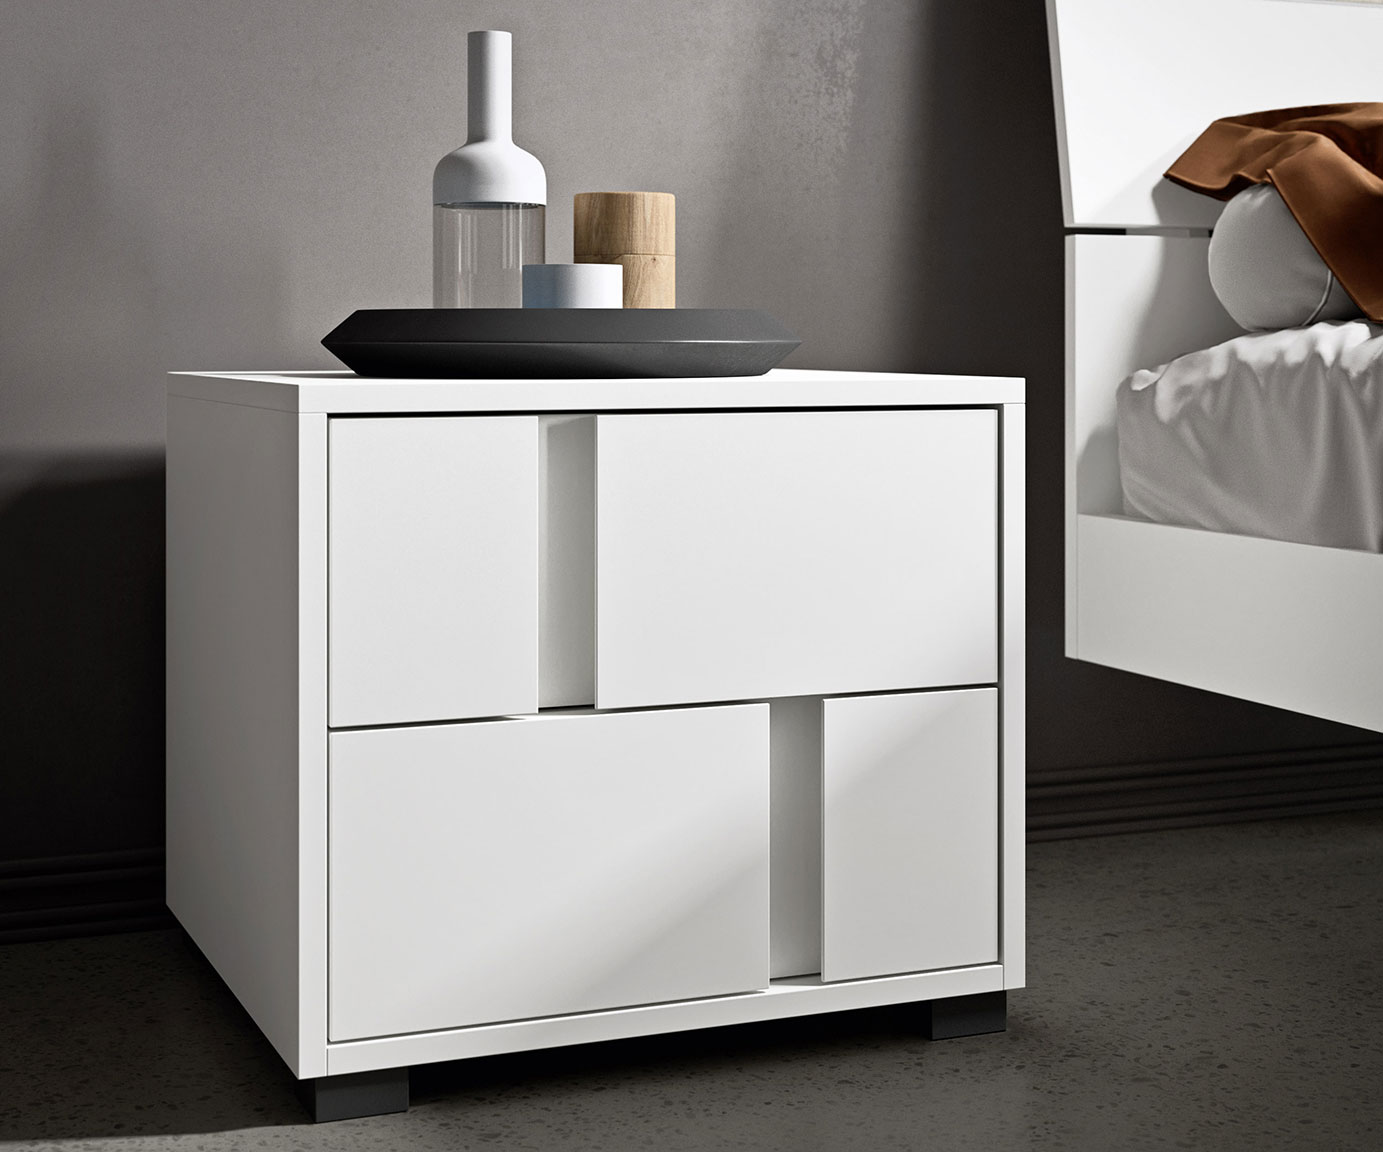 Contemporary style glide bedsides, drawer units and chests 4